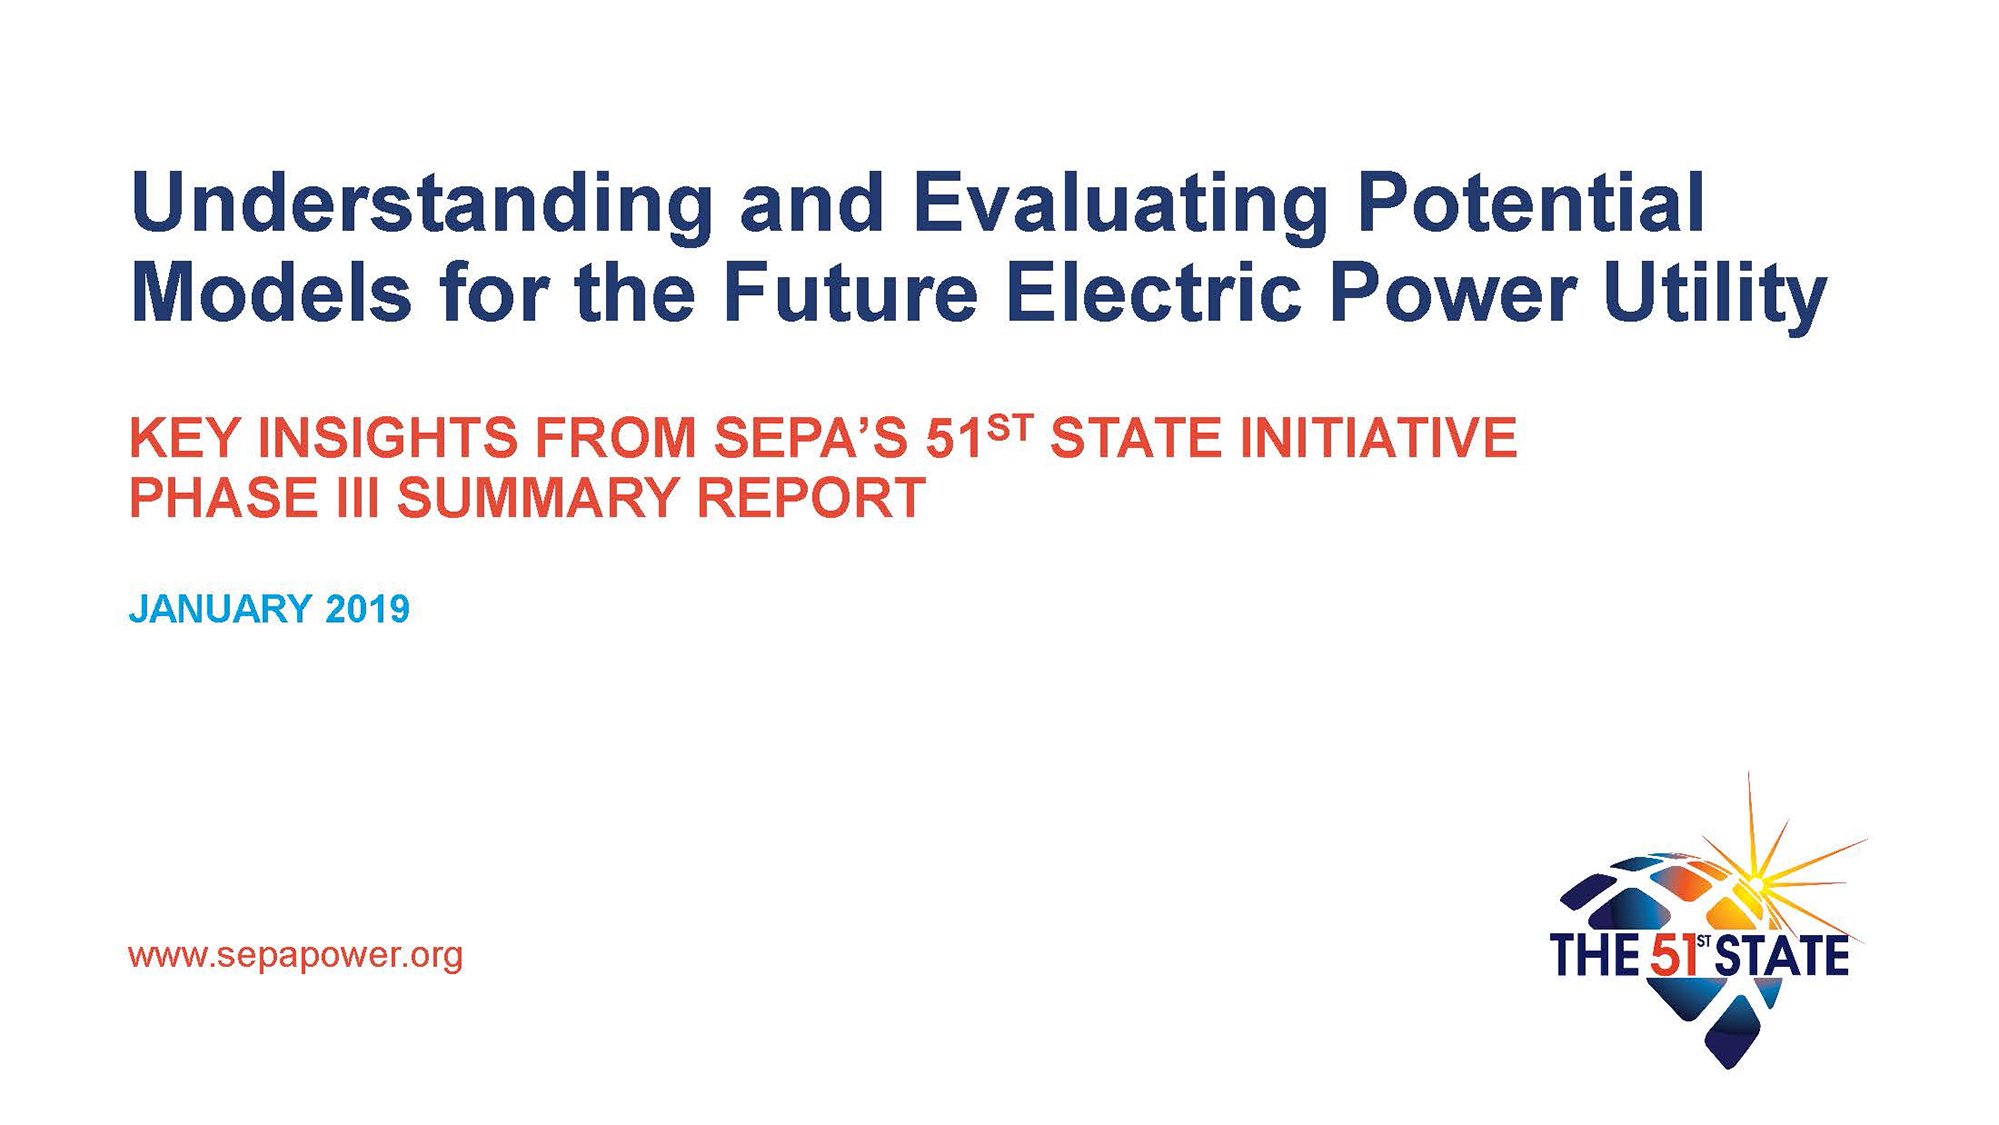 Understanding and Evaluating Potential Models for the Future Electric Power Utility